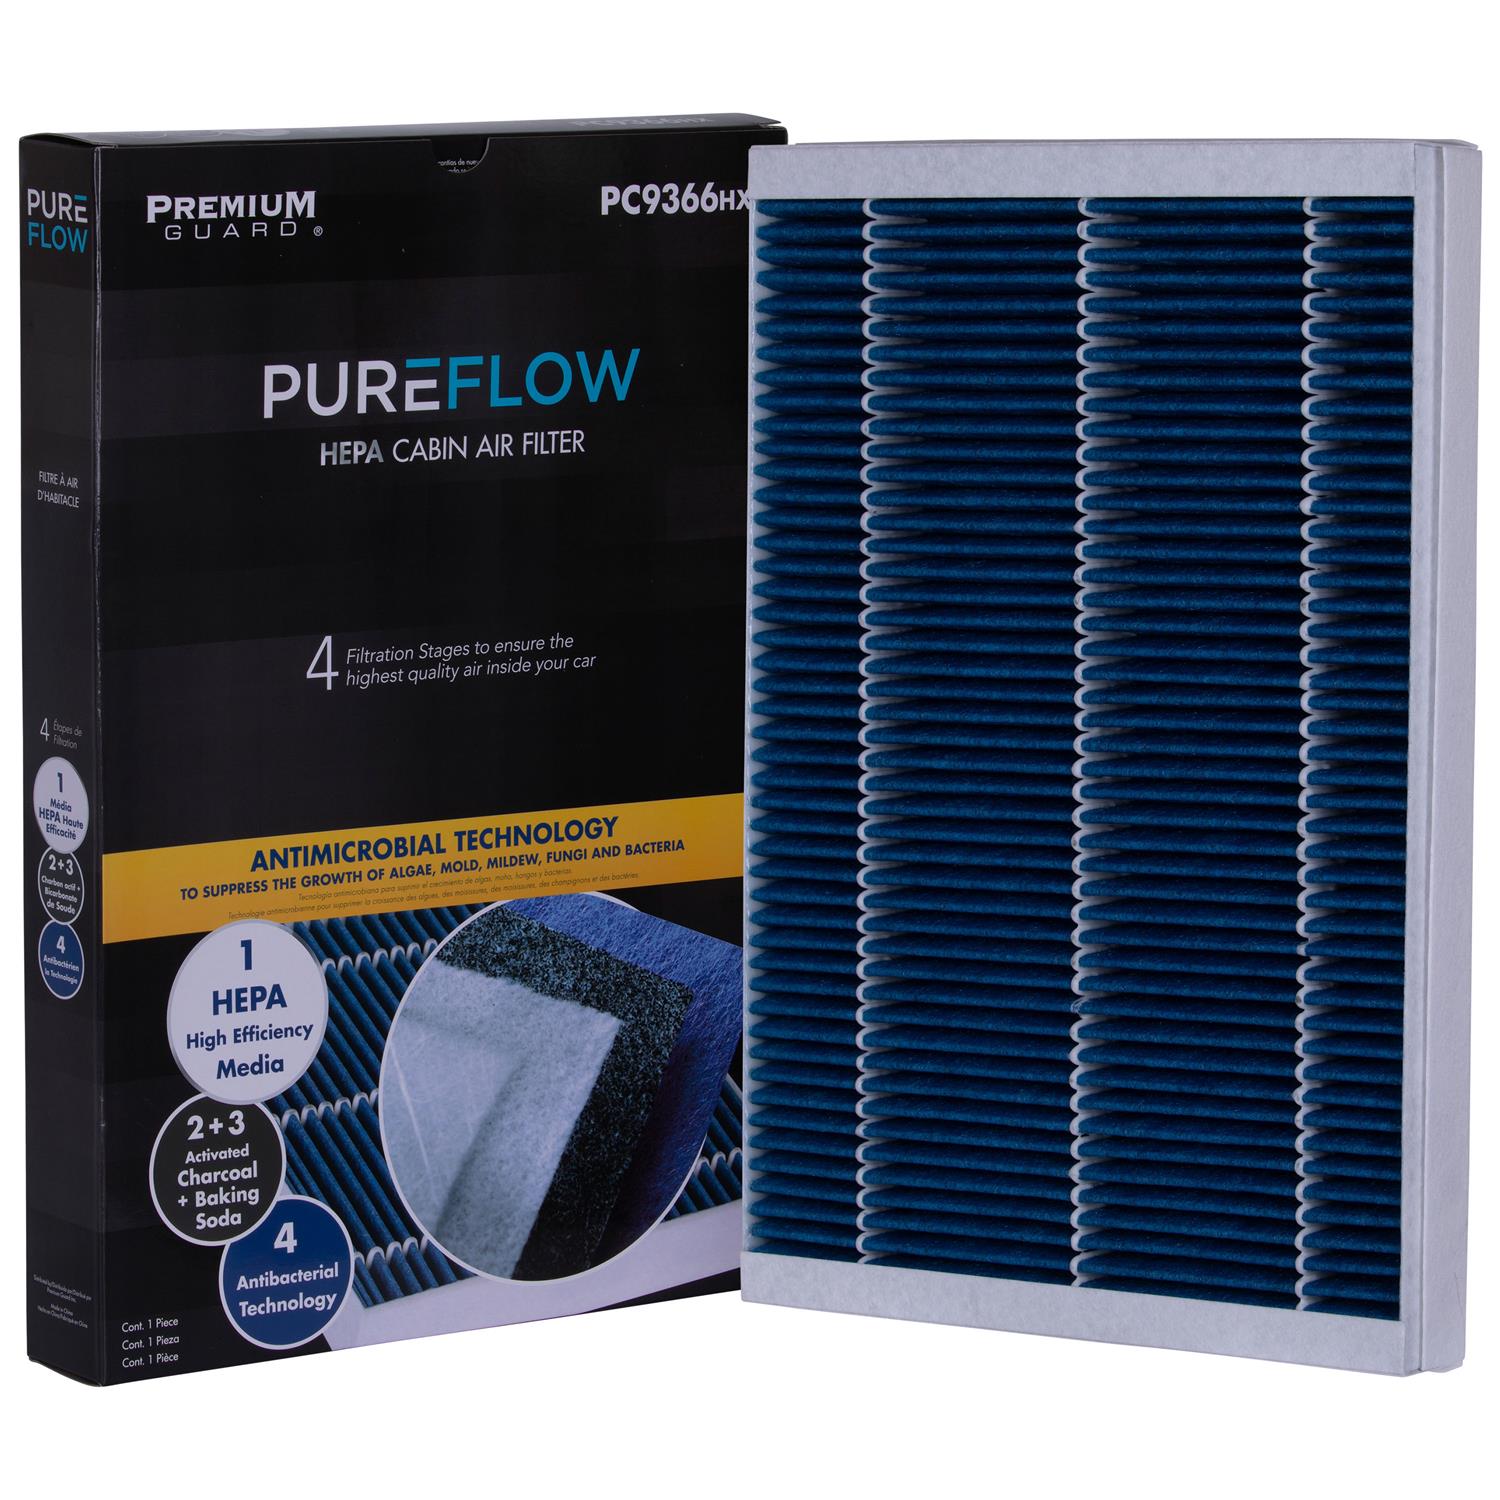 PUREFLOW 2016 Mercedes-Benz Sprinter 2500 Cabin Air Filter with HEPA and Antibacterial Technology, PC9366HX